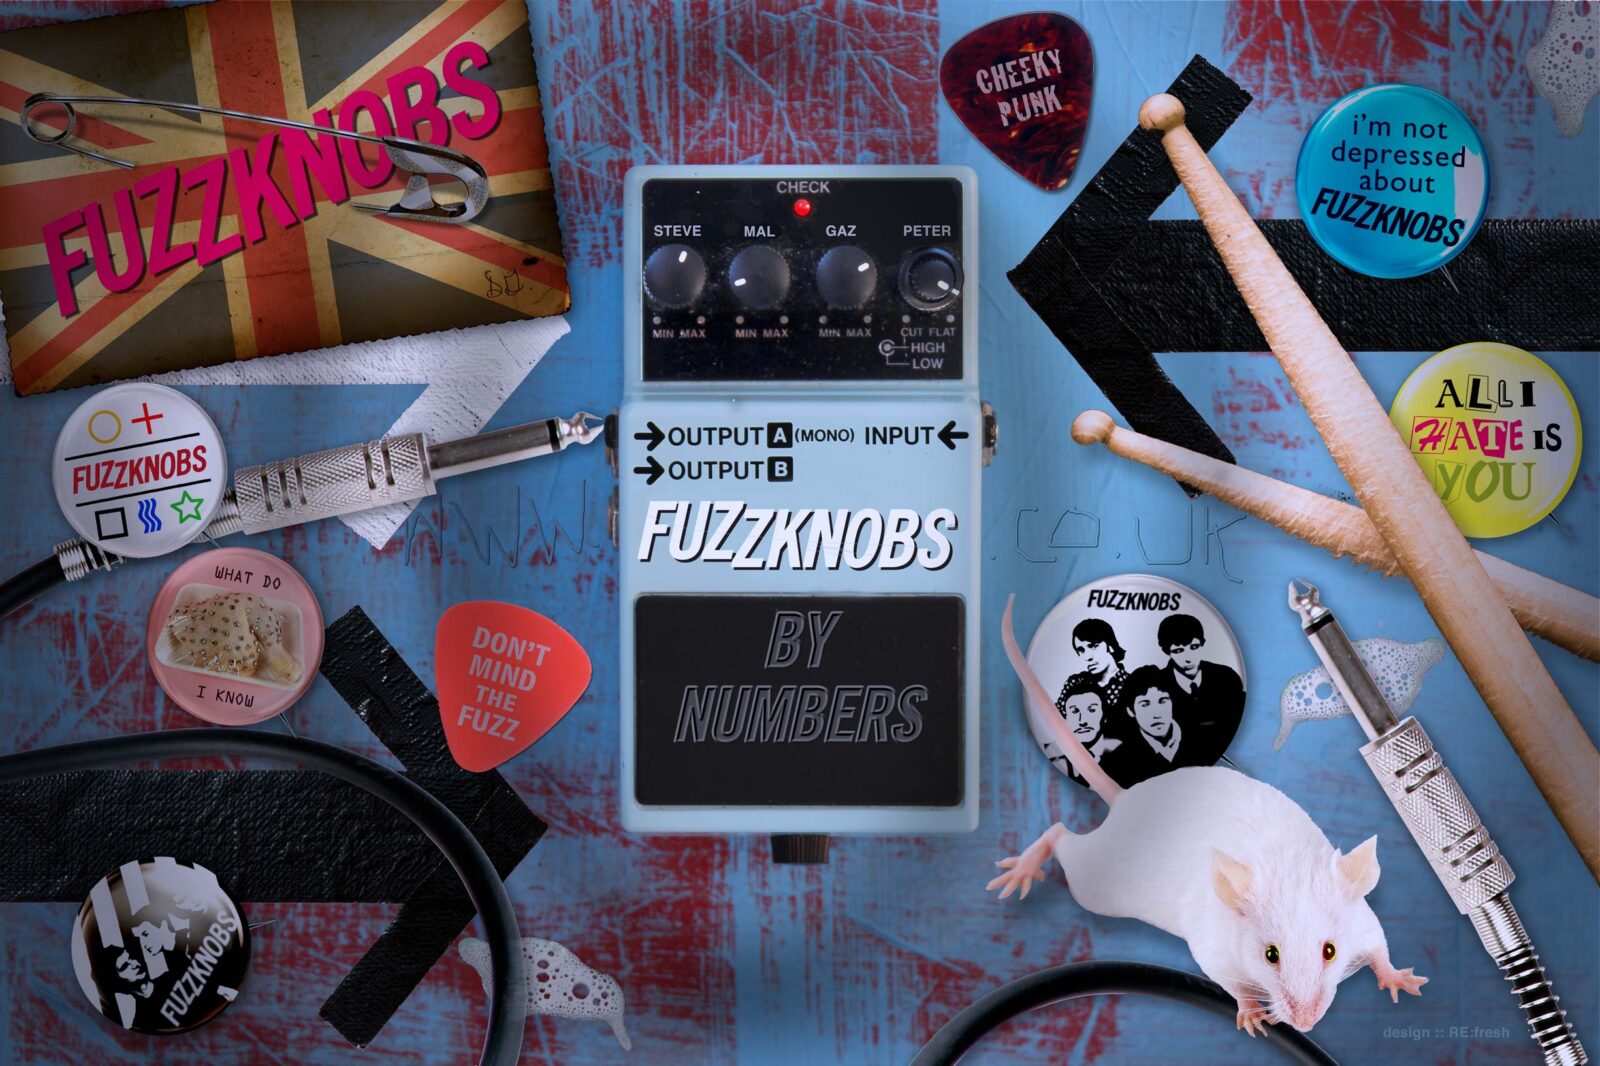 Day 079 fuzzknobs by numbers guitar pedal